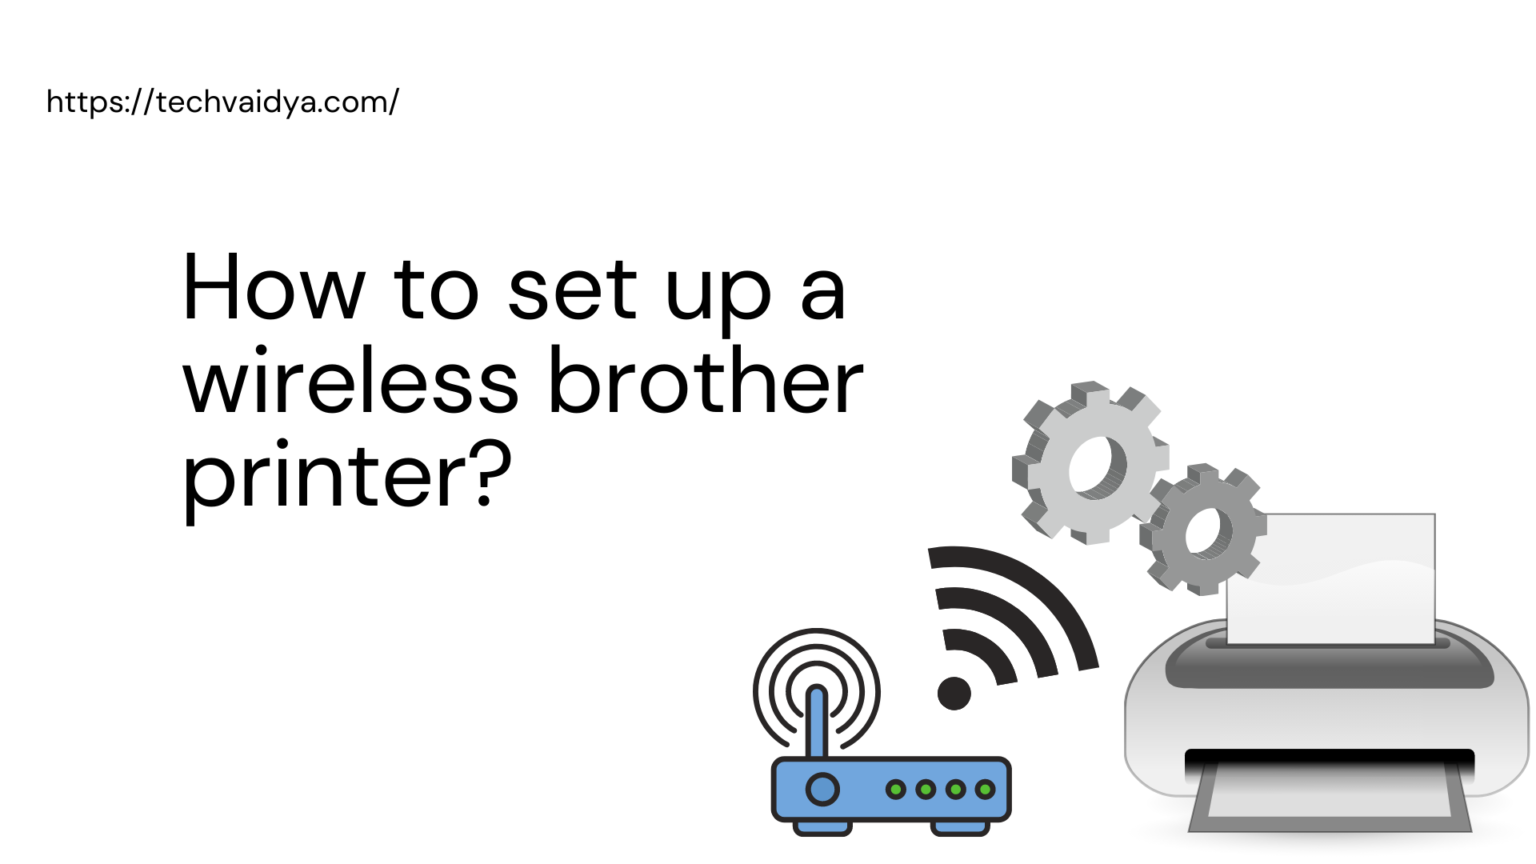 how to install brother wireless printer without cd